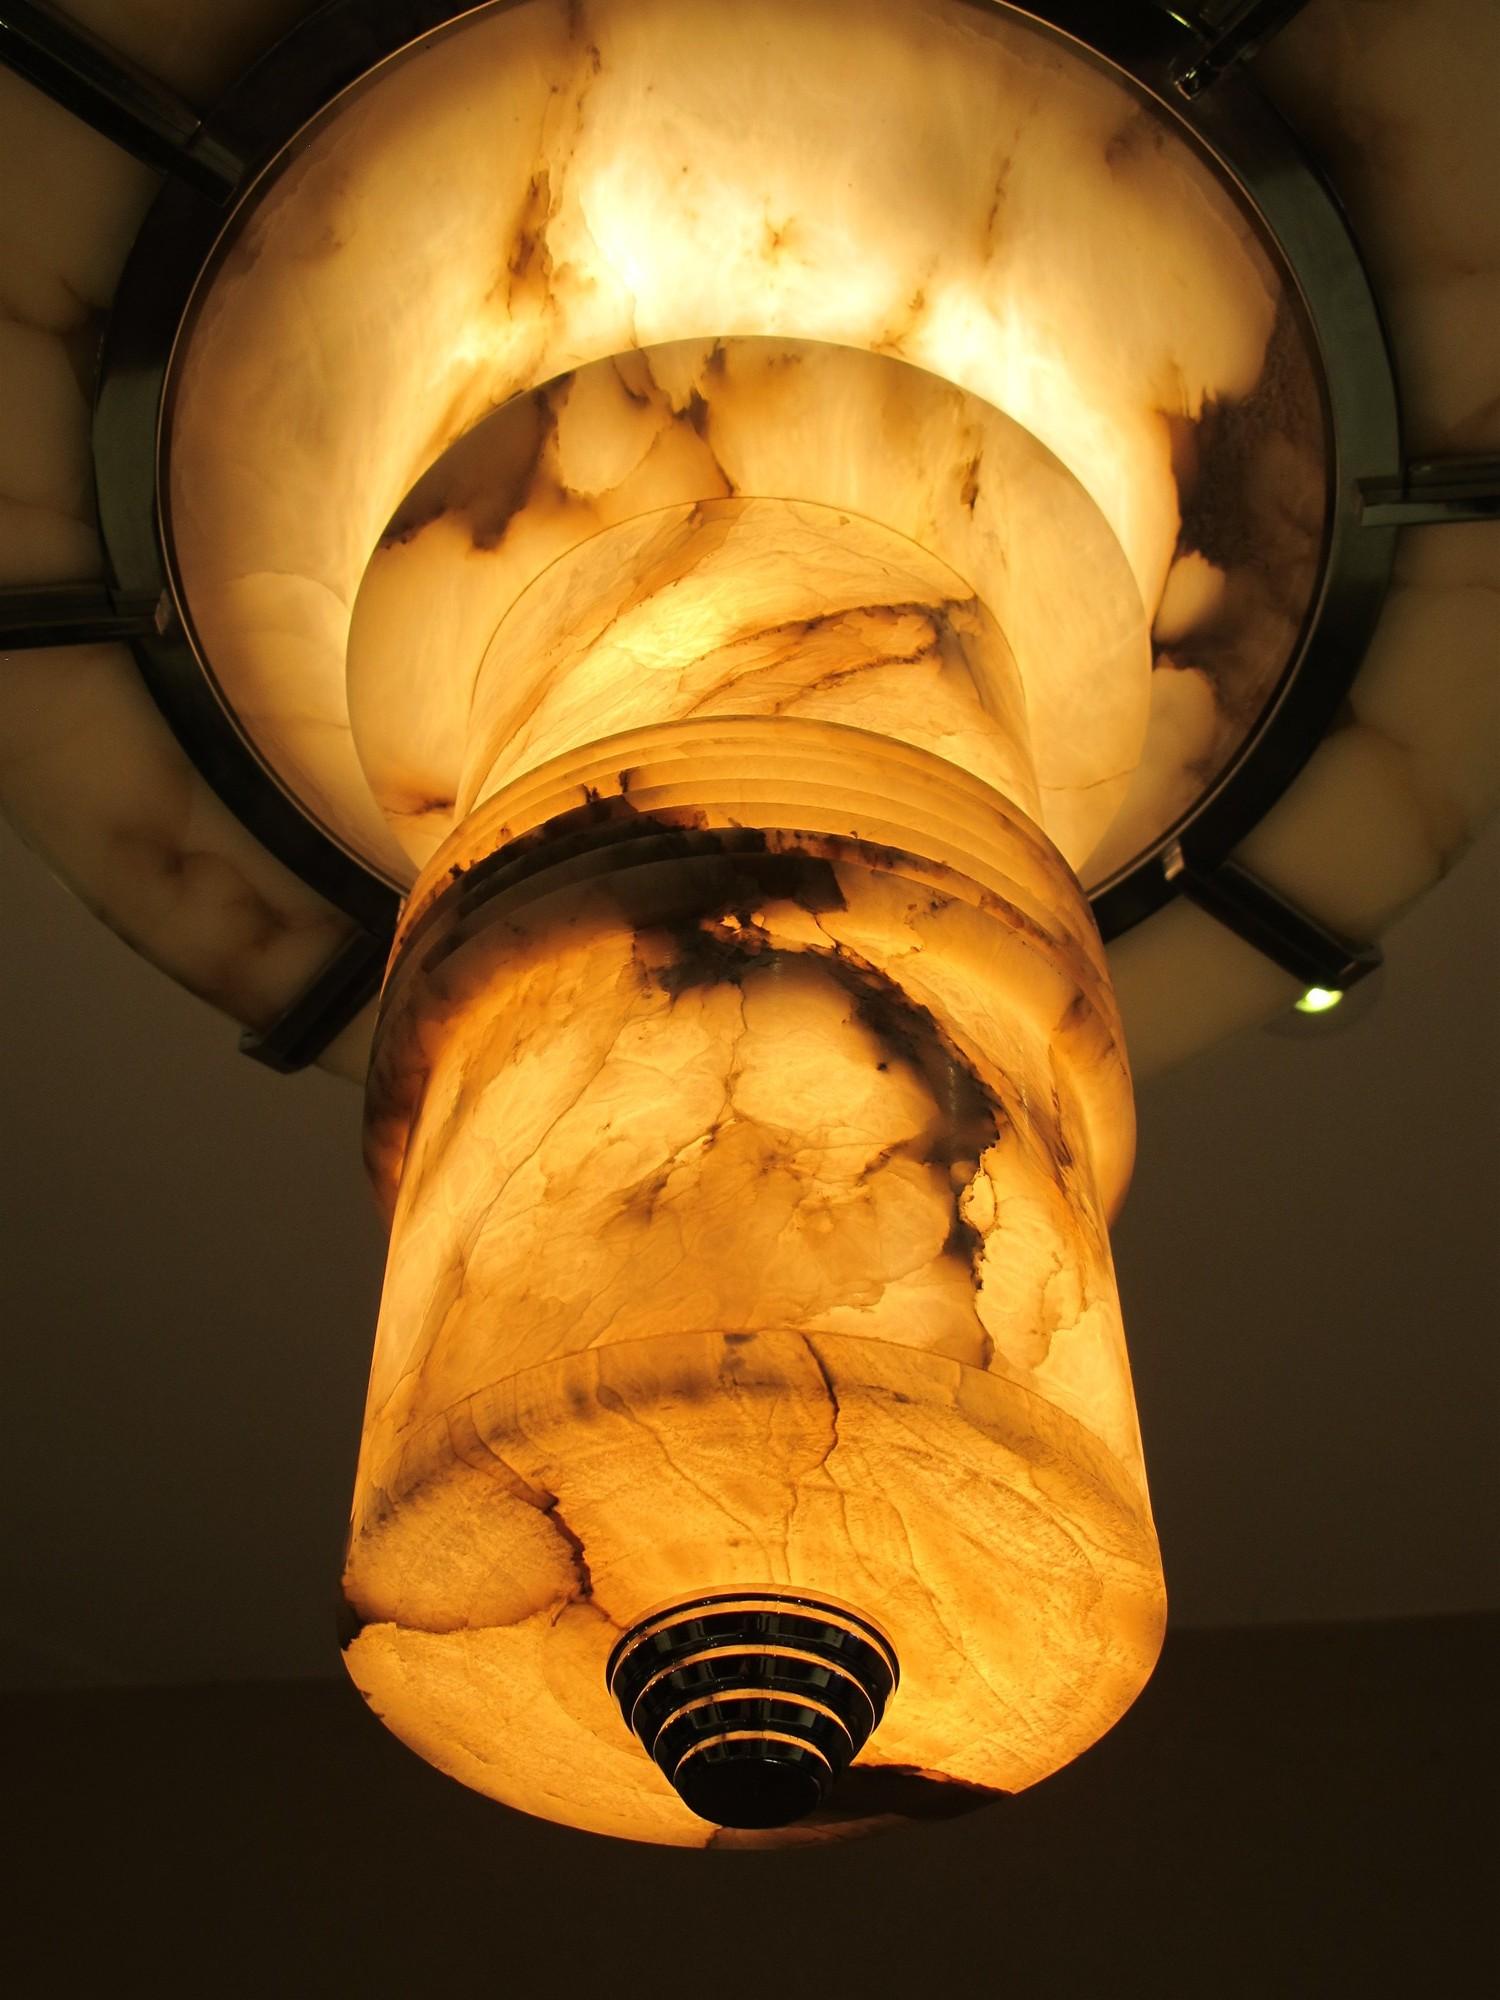 Amazing Hanging lamps in alabaster 67 cm diametro x 190 high cm.
if you have problems to the hight, We can cut the Barral, at the indicated height (free of charge).
Style: Art Deco
Year: 1935
Material: alabaster and chrome.
For your safety and that